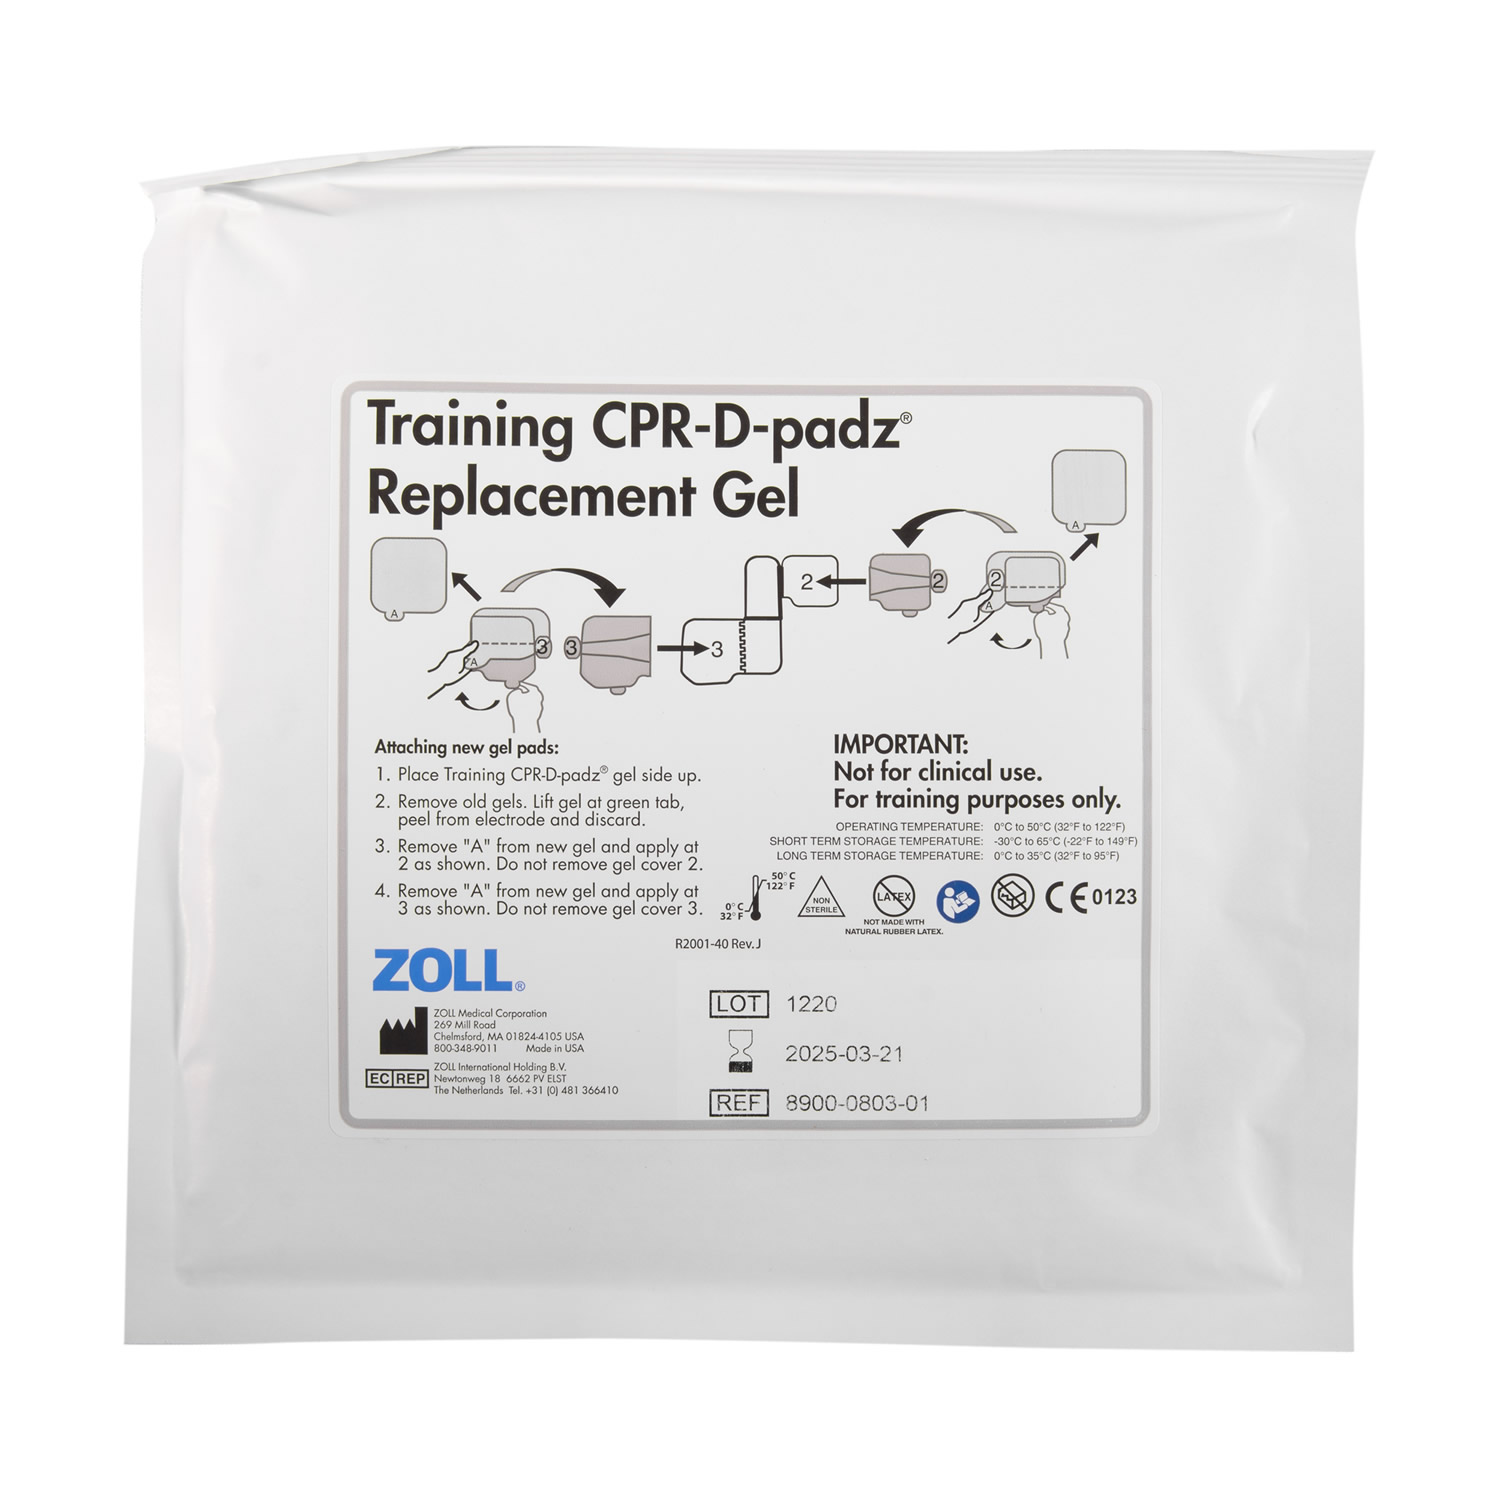 Zoll AED Plus Replacement Training Gel Pads - 5 pairs